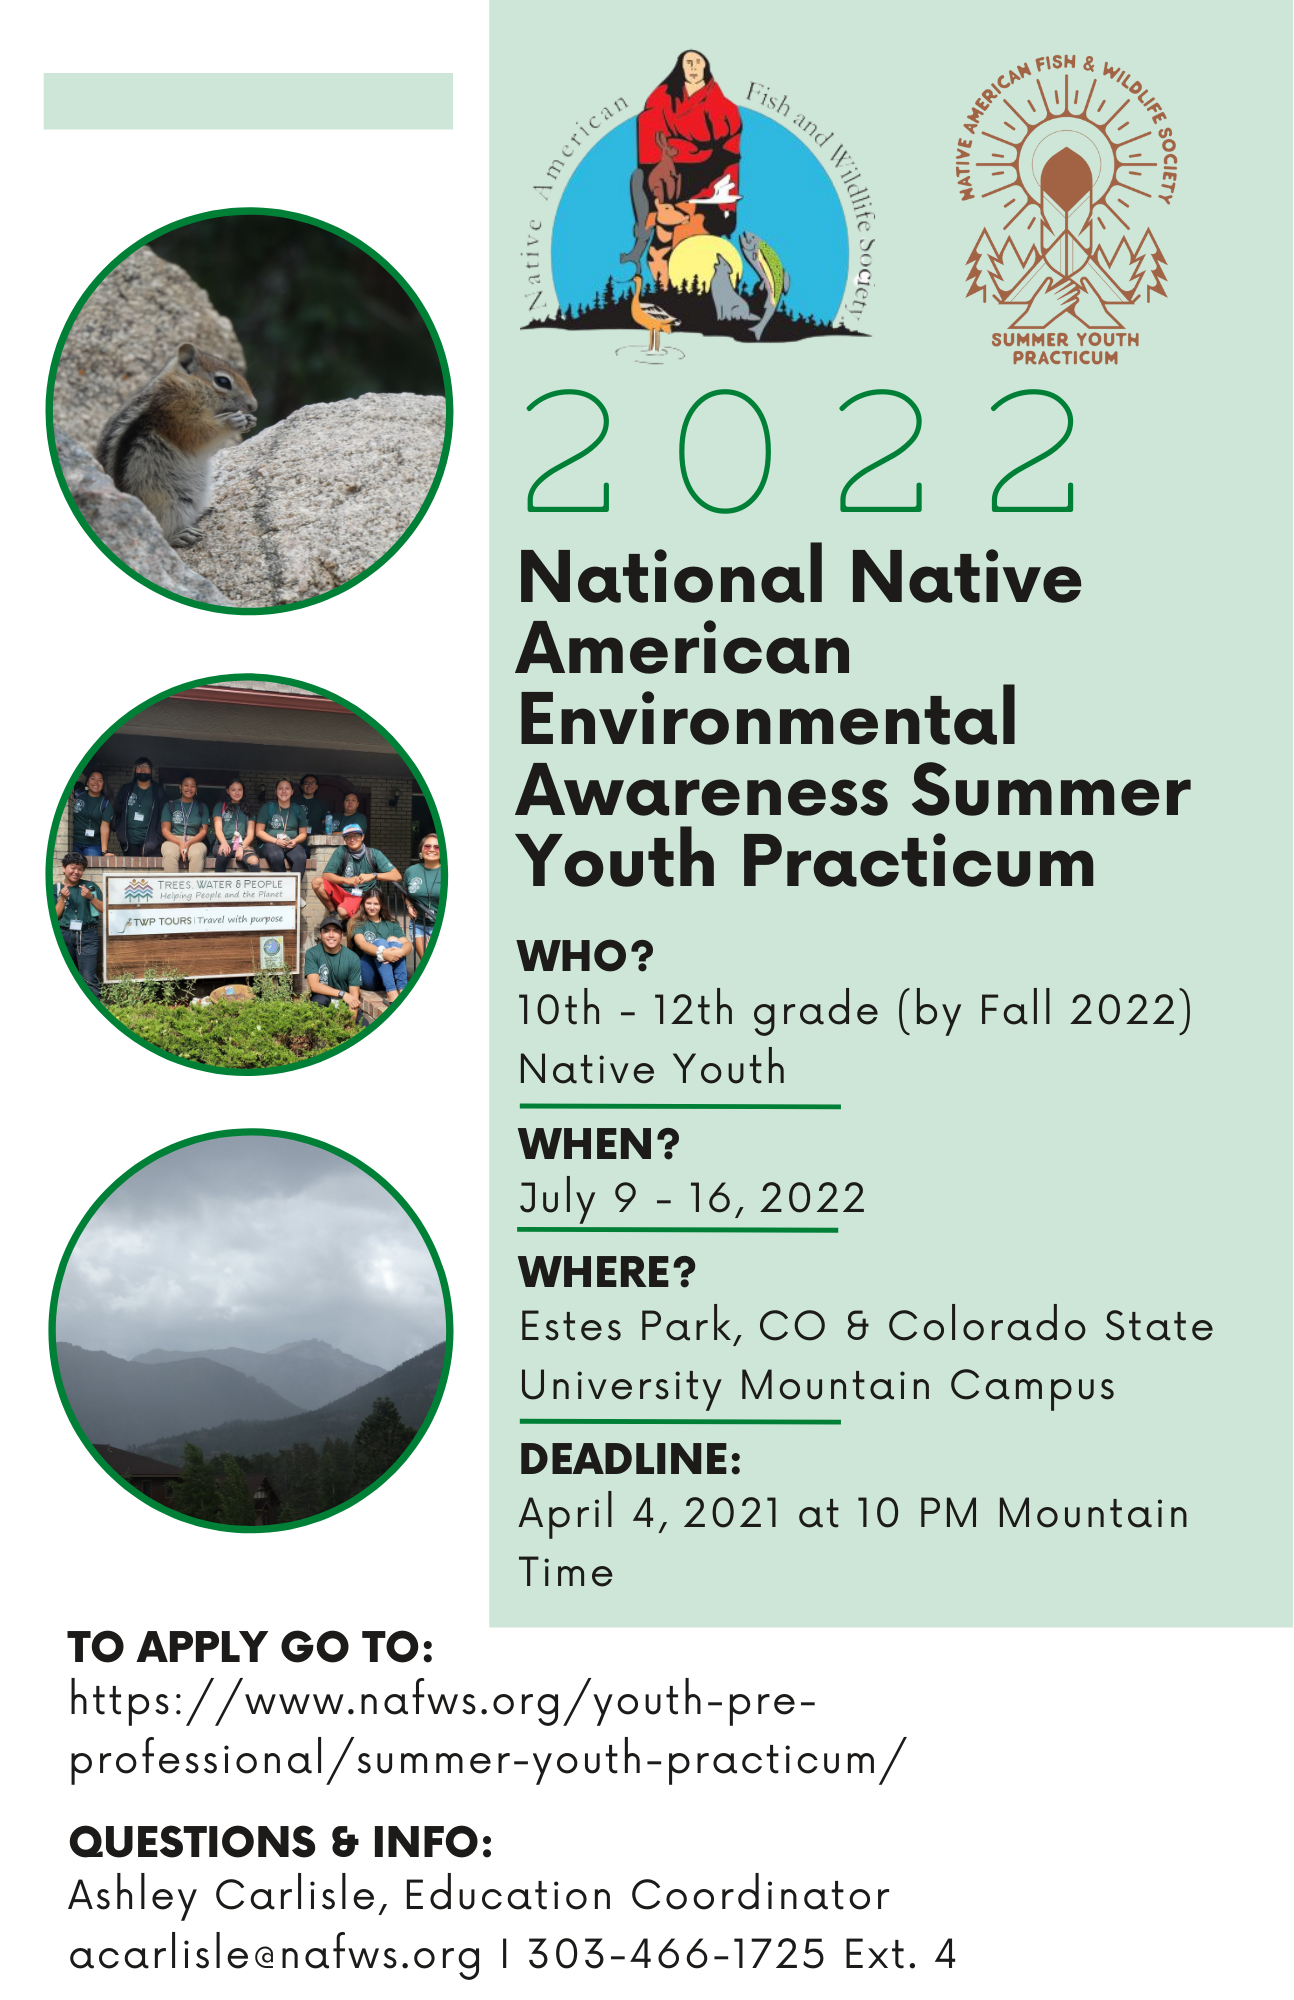 The Native American Fish & Wildlife Society Offers Summer Youth